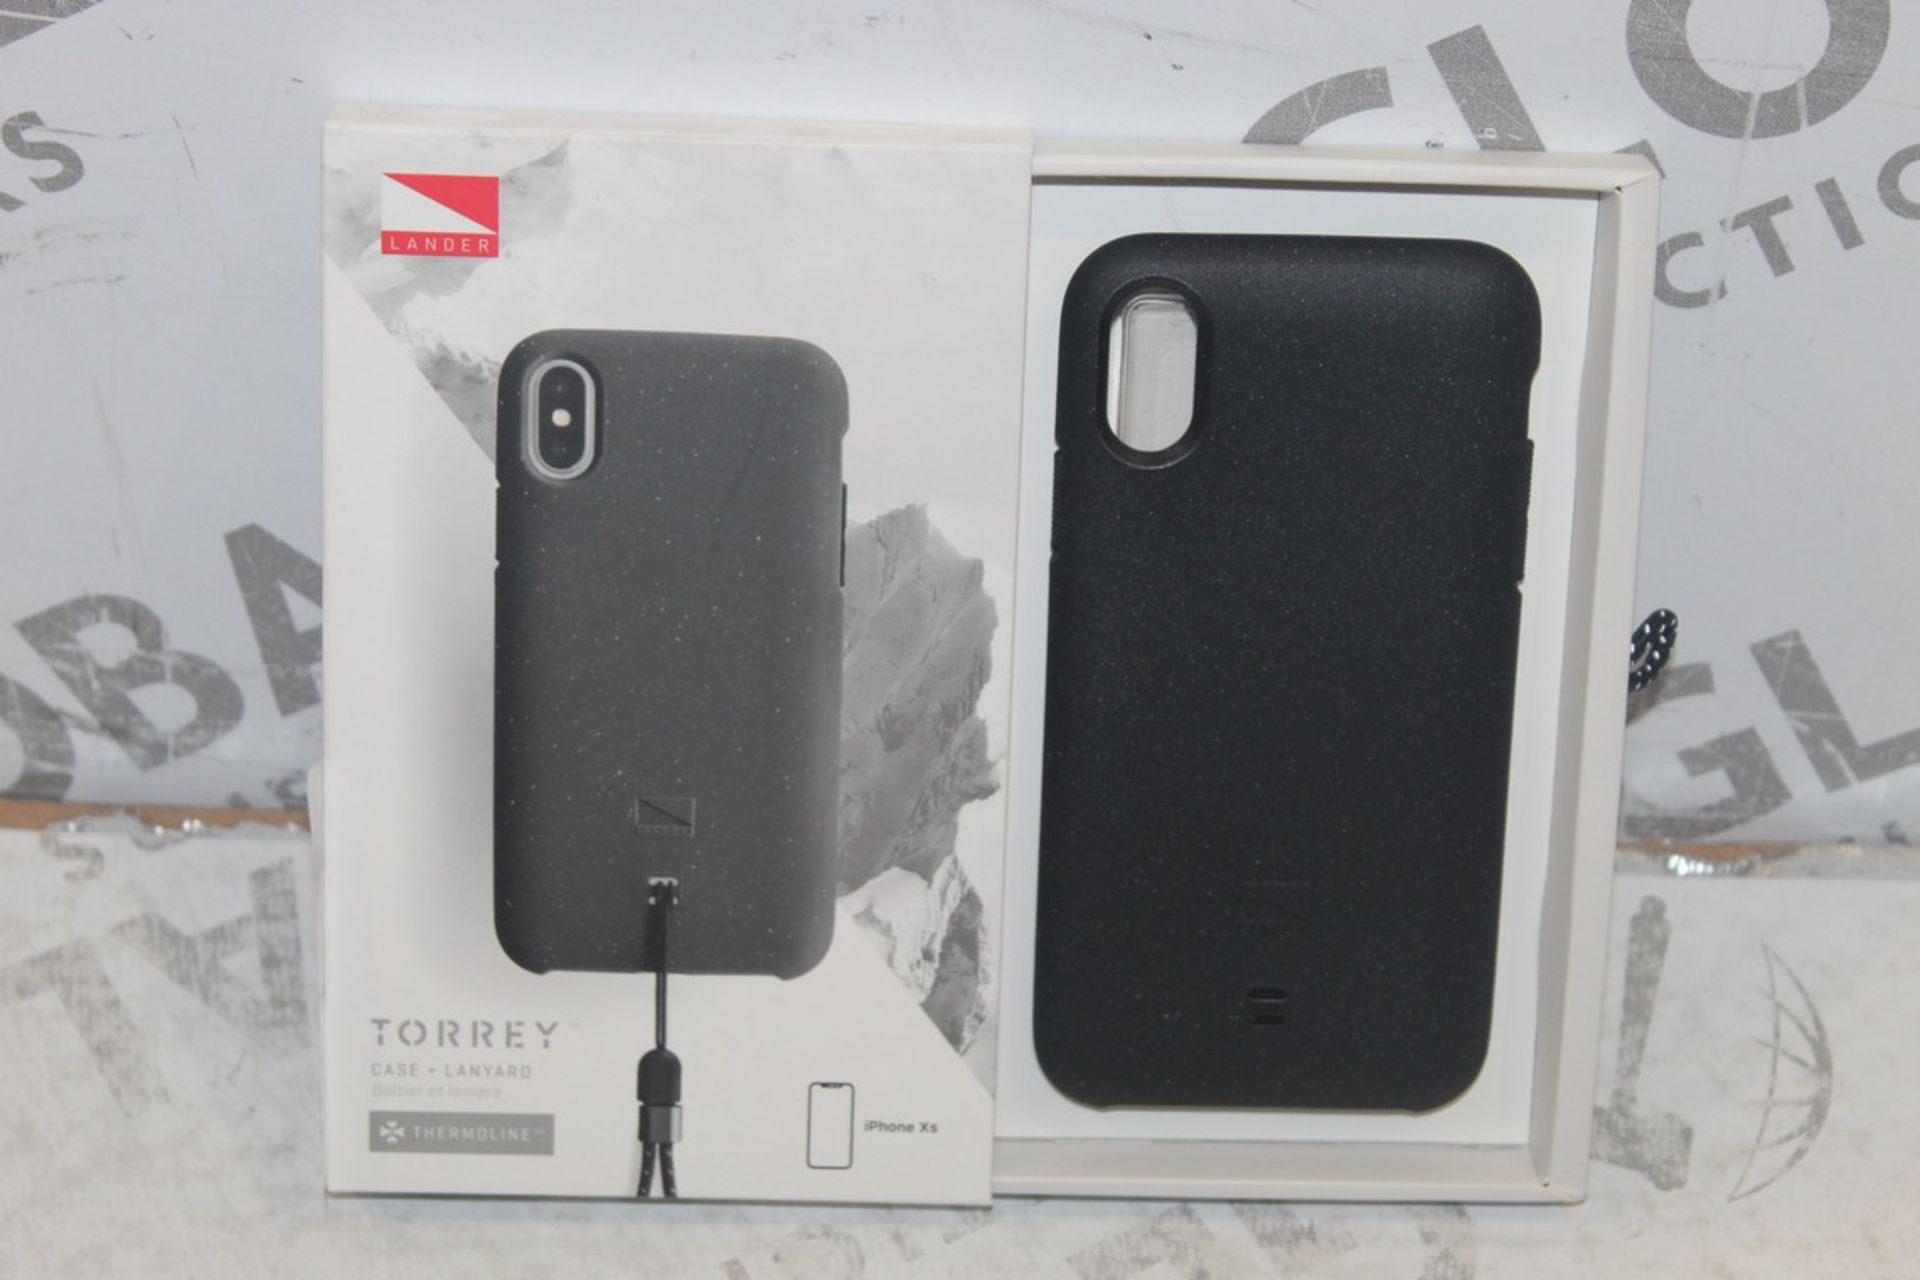 Lot To Contain 2 Brand New Torrey Lander Excess Mobile Phone Cases Combined RRP £80 (Pictures Are